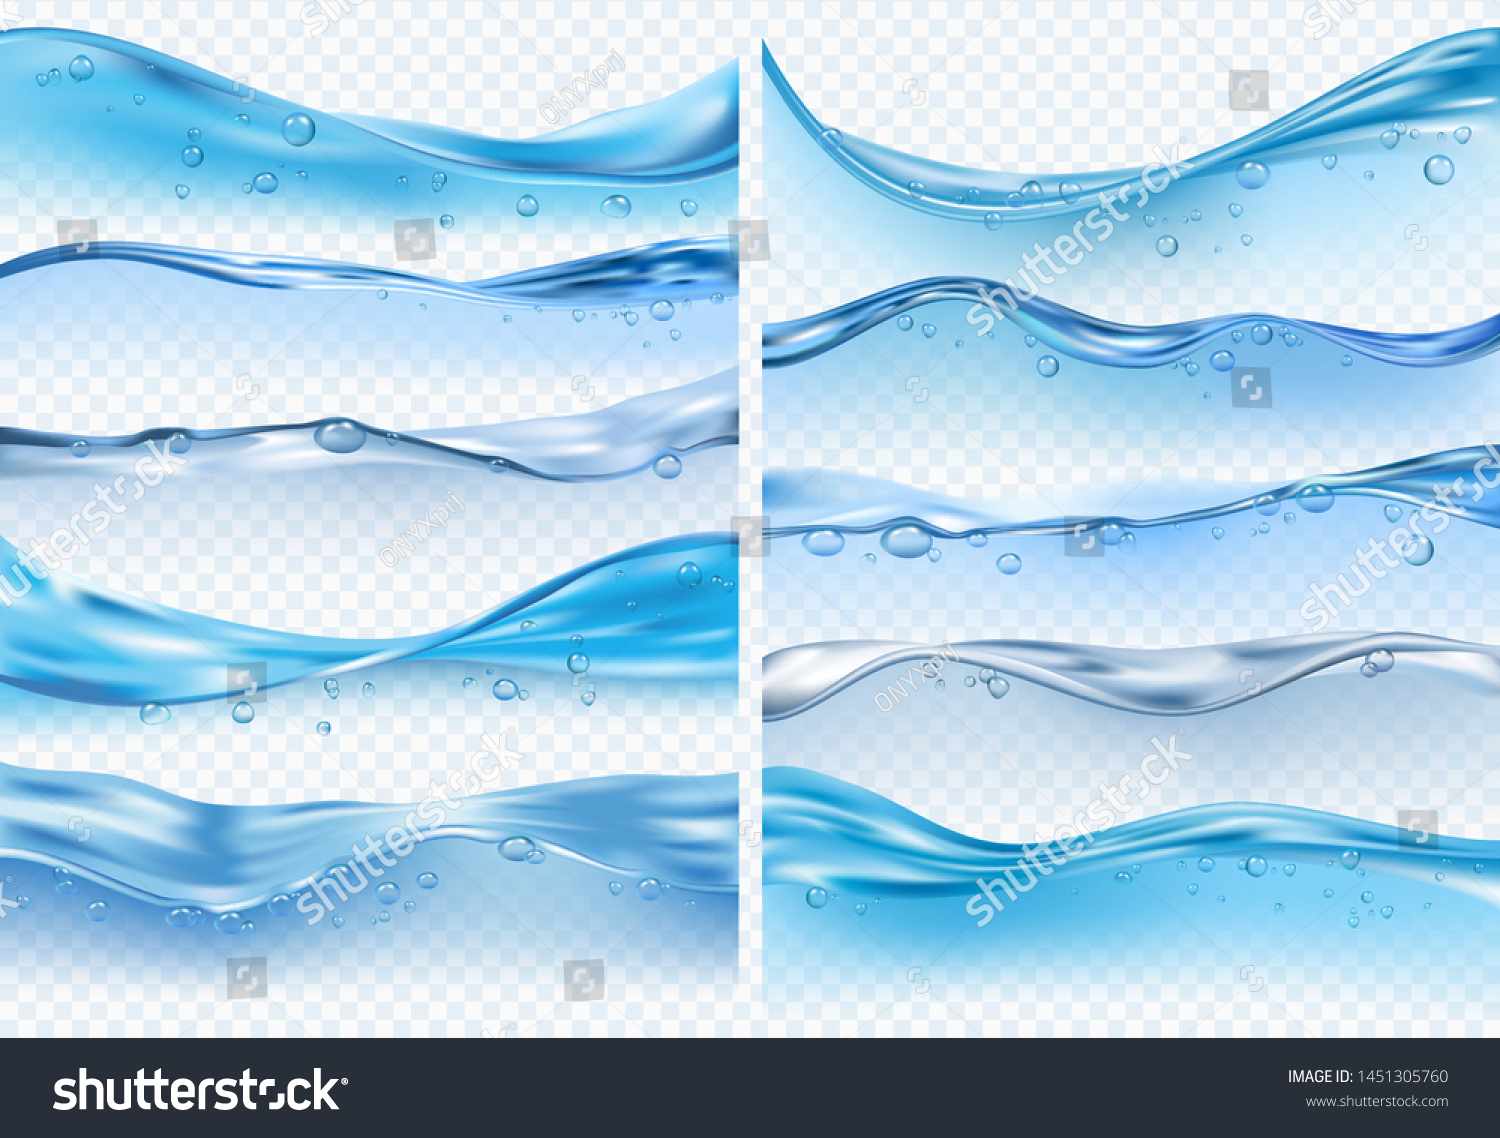 Wave realistic splashes. Liquid water surface with bubbles and splashes ocean or sea vector backgrounds on transparent background #1451305760